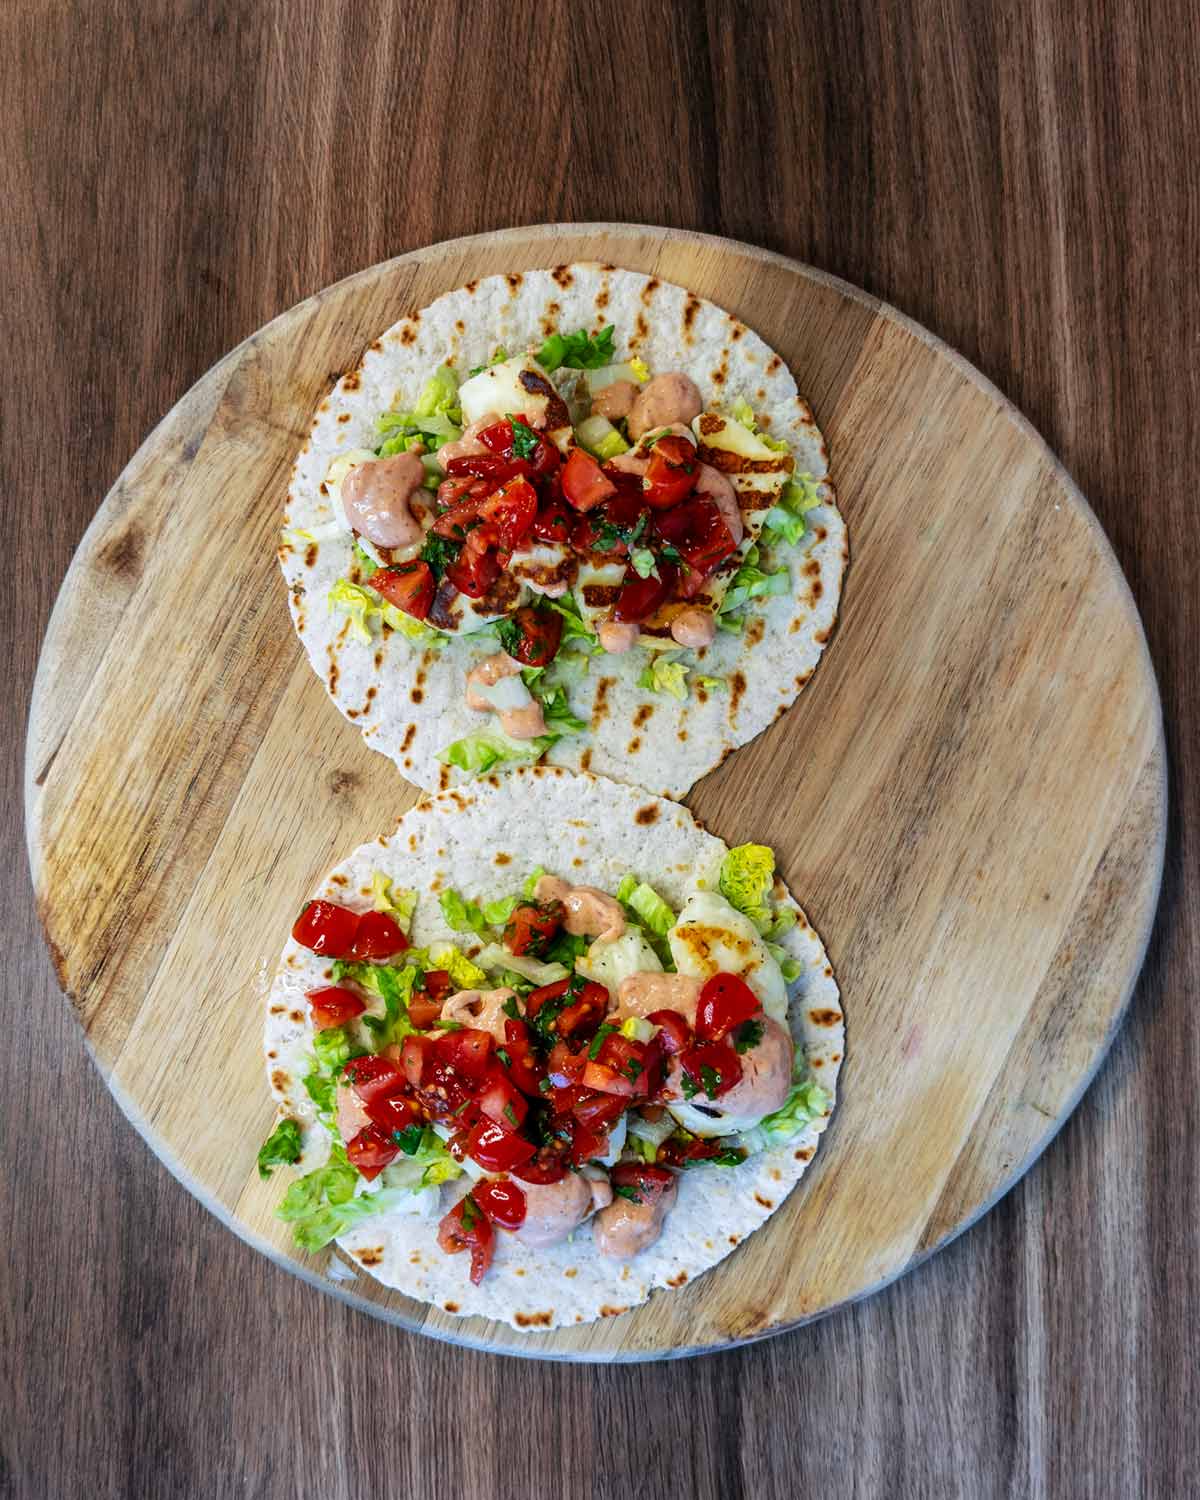 Assemble tacos on a round serving board.